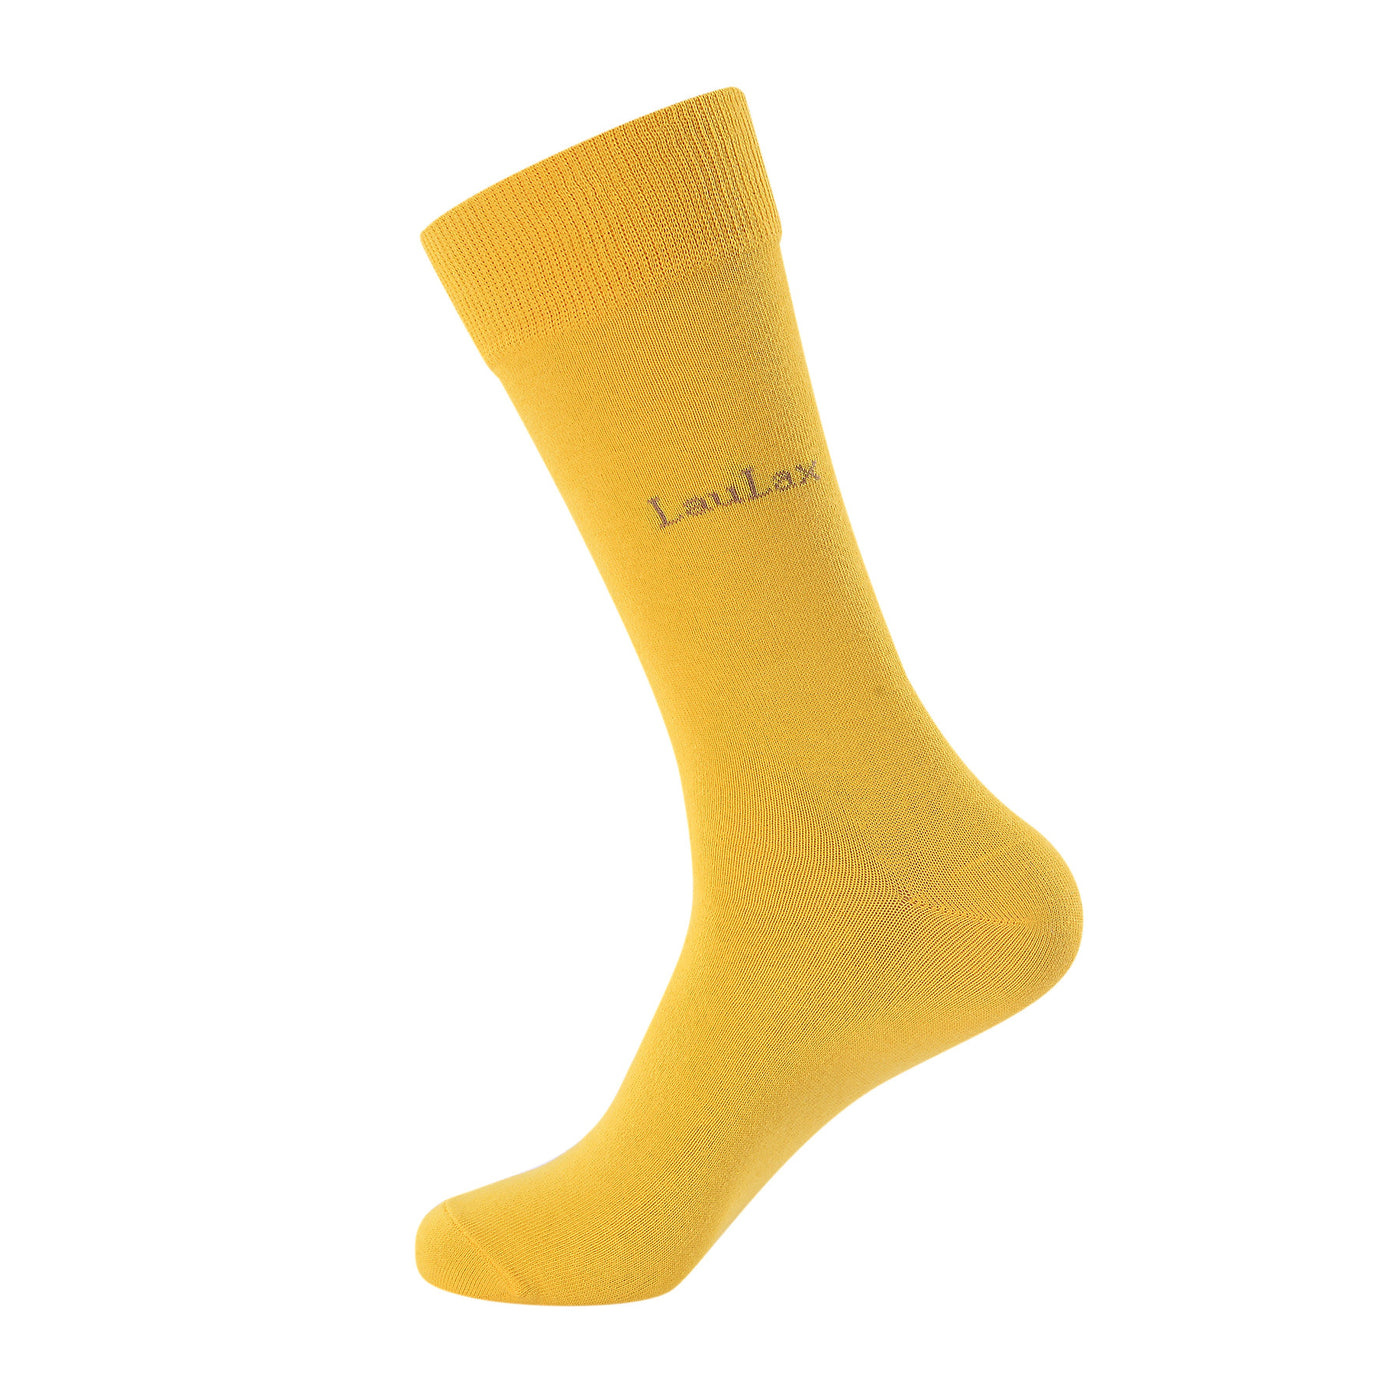 High Quality Formal Finest Combed Cotton Socks In Yellow